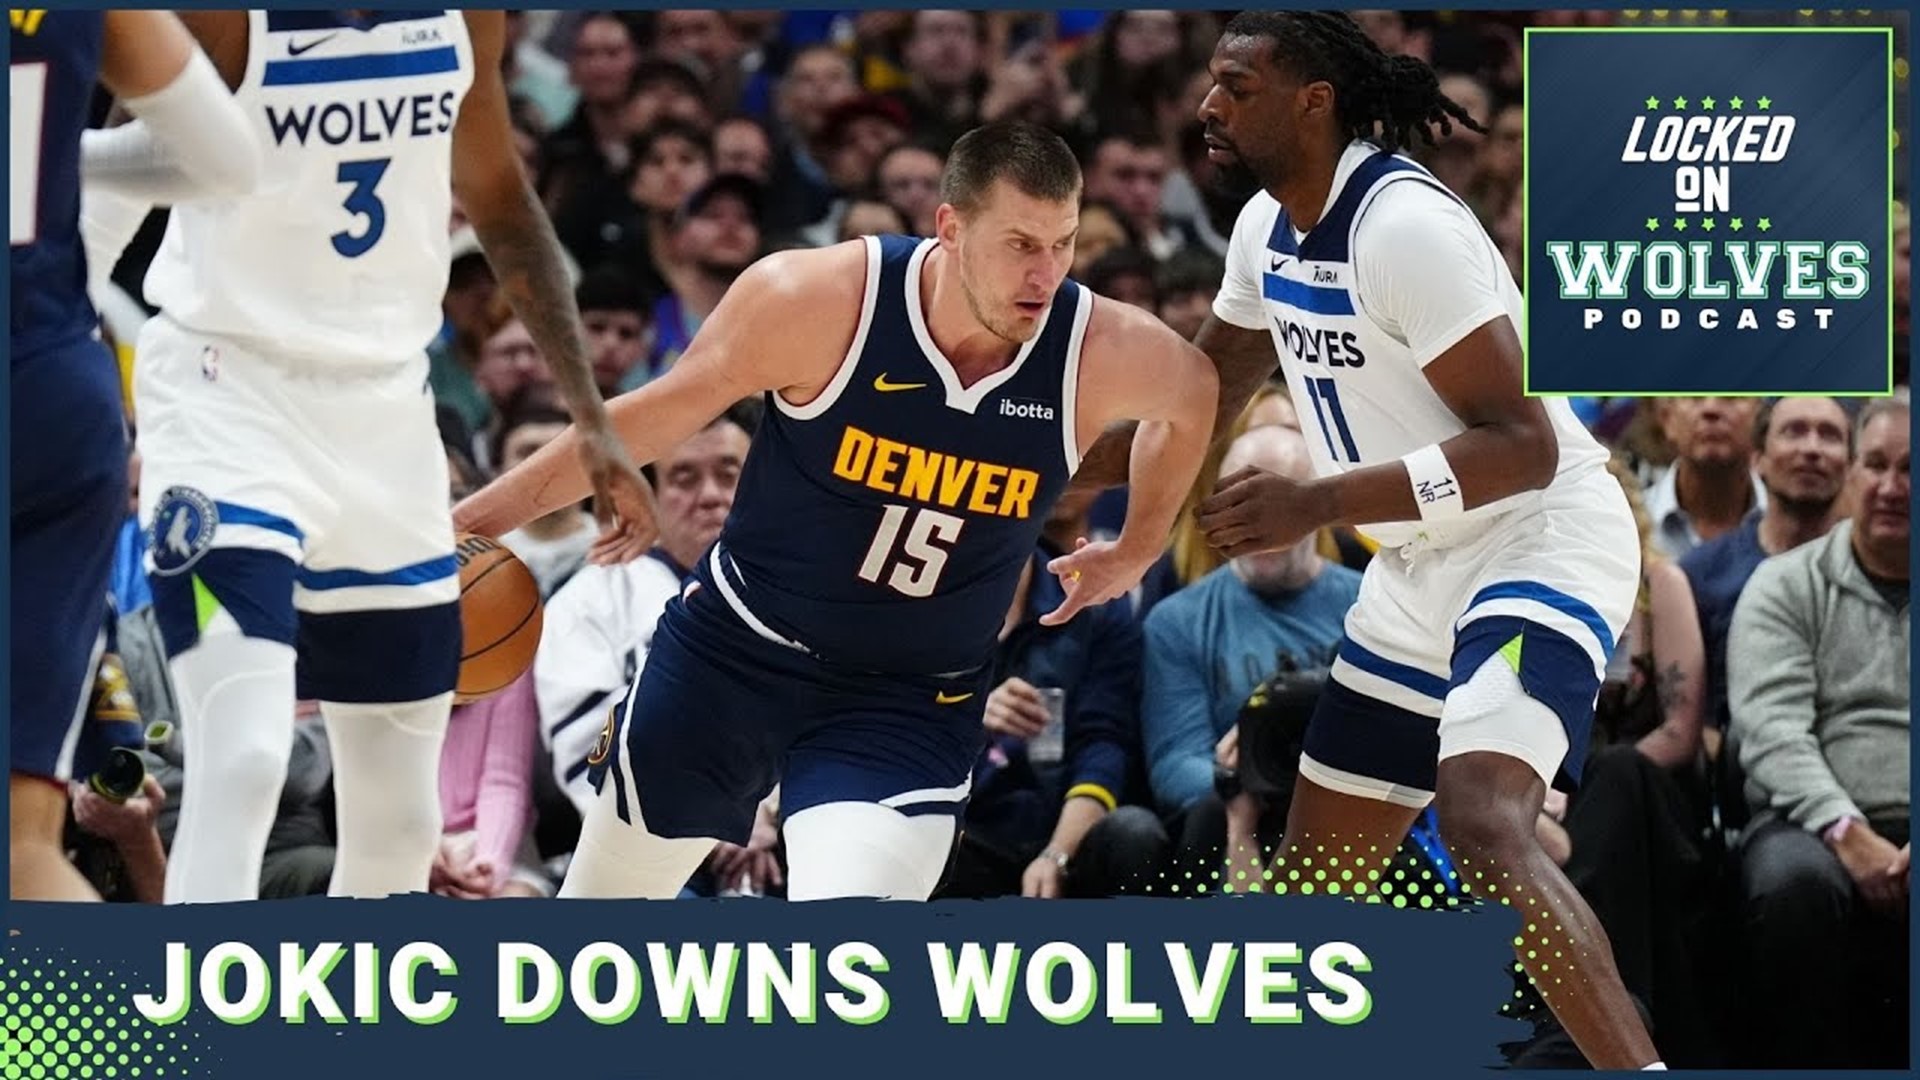 Nikola Jokic carries Denver Nuggets past the Minnesota Timberwolves in battle for top West seed